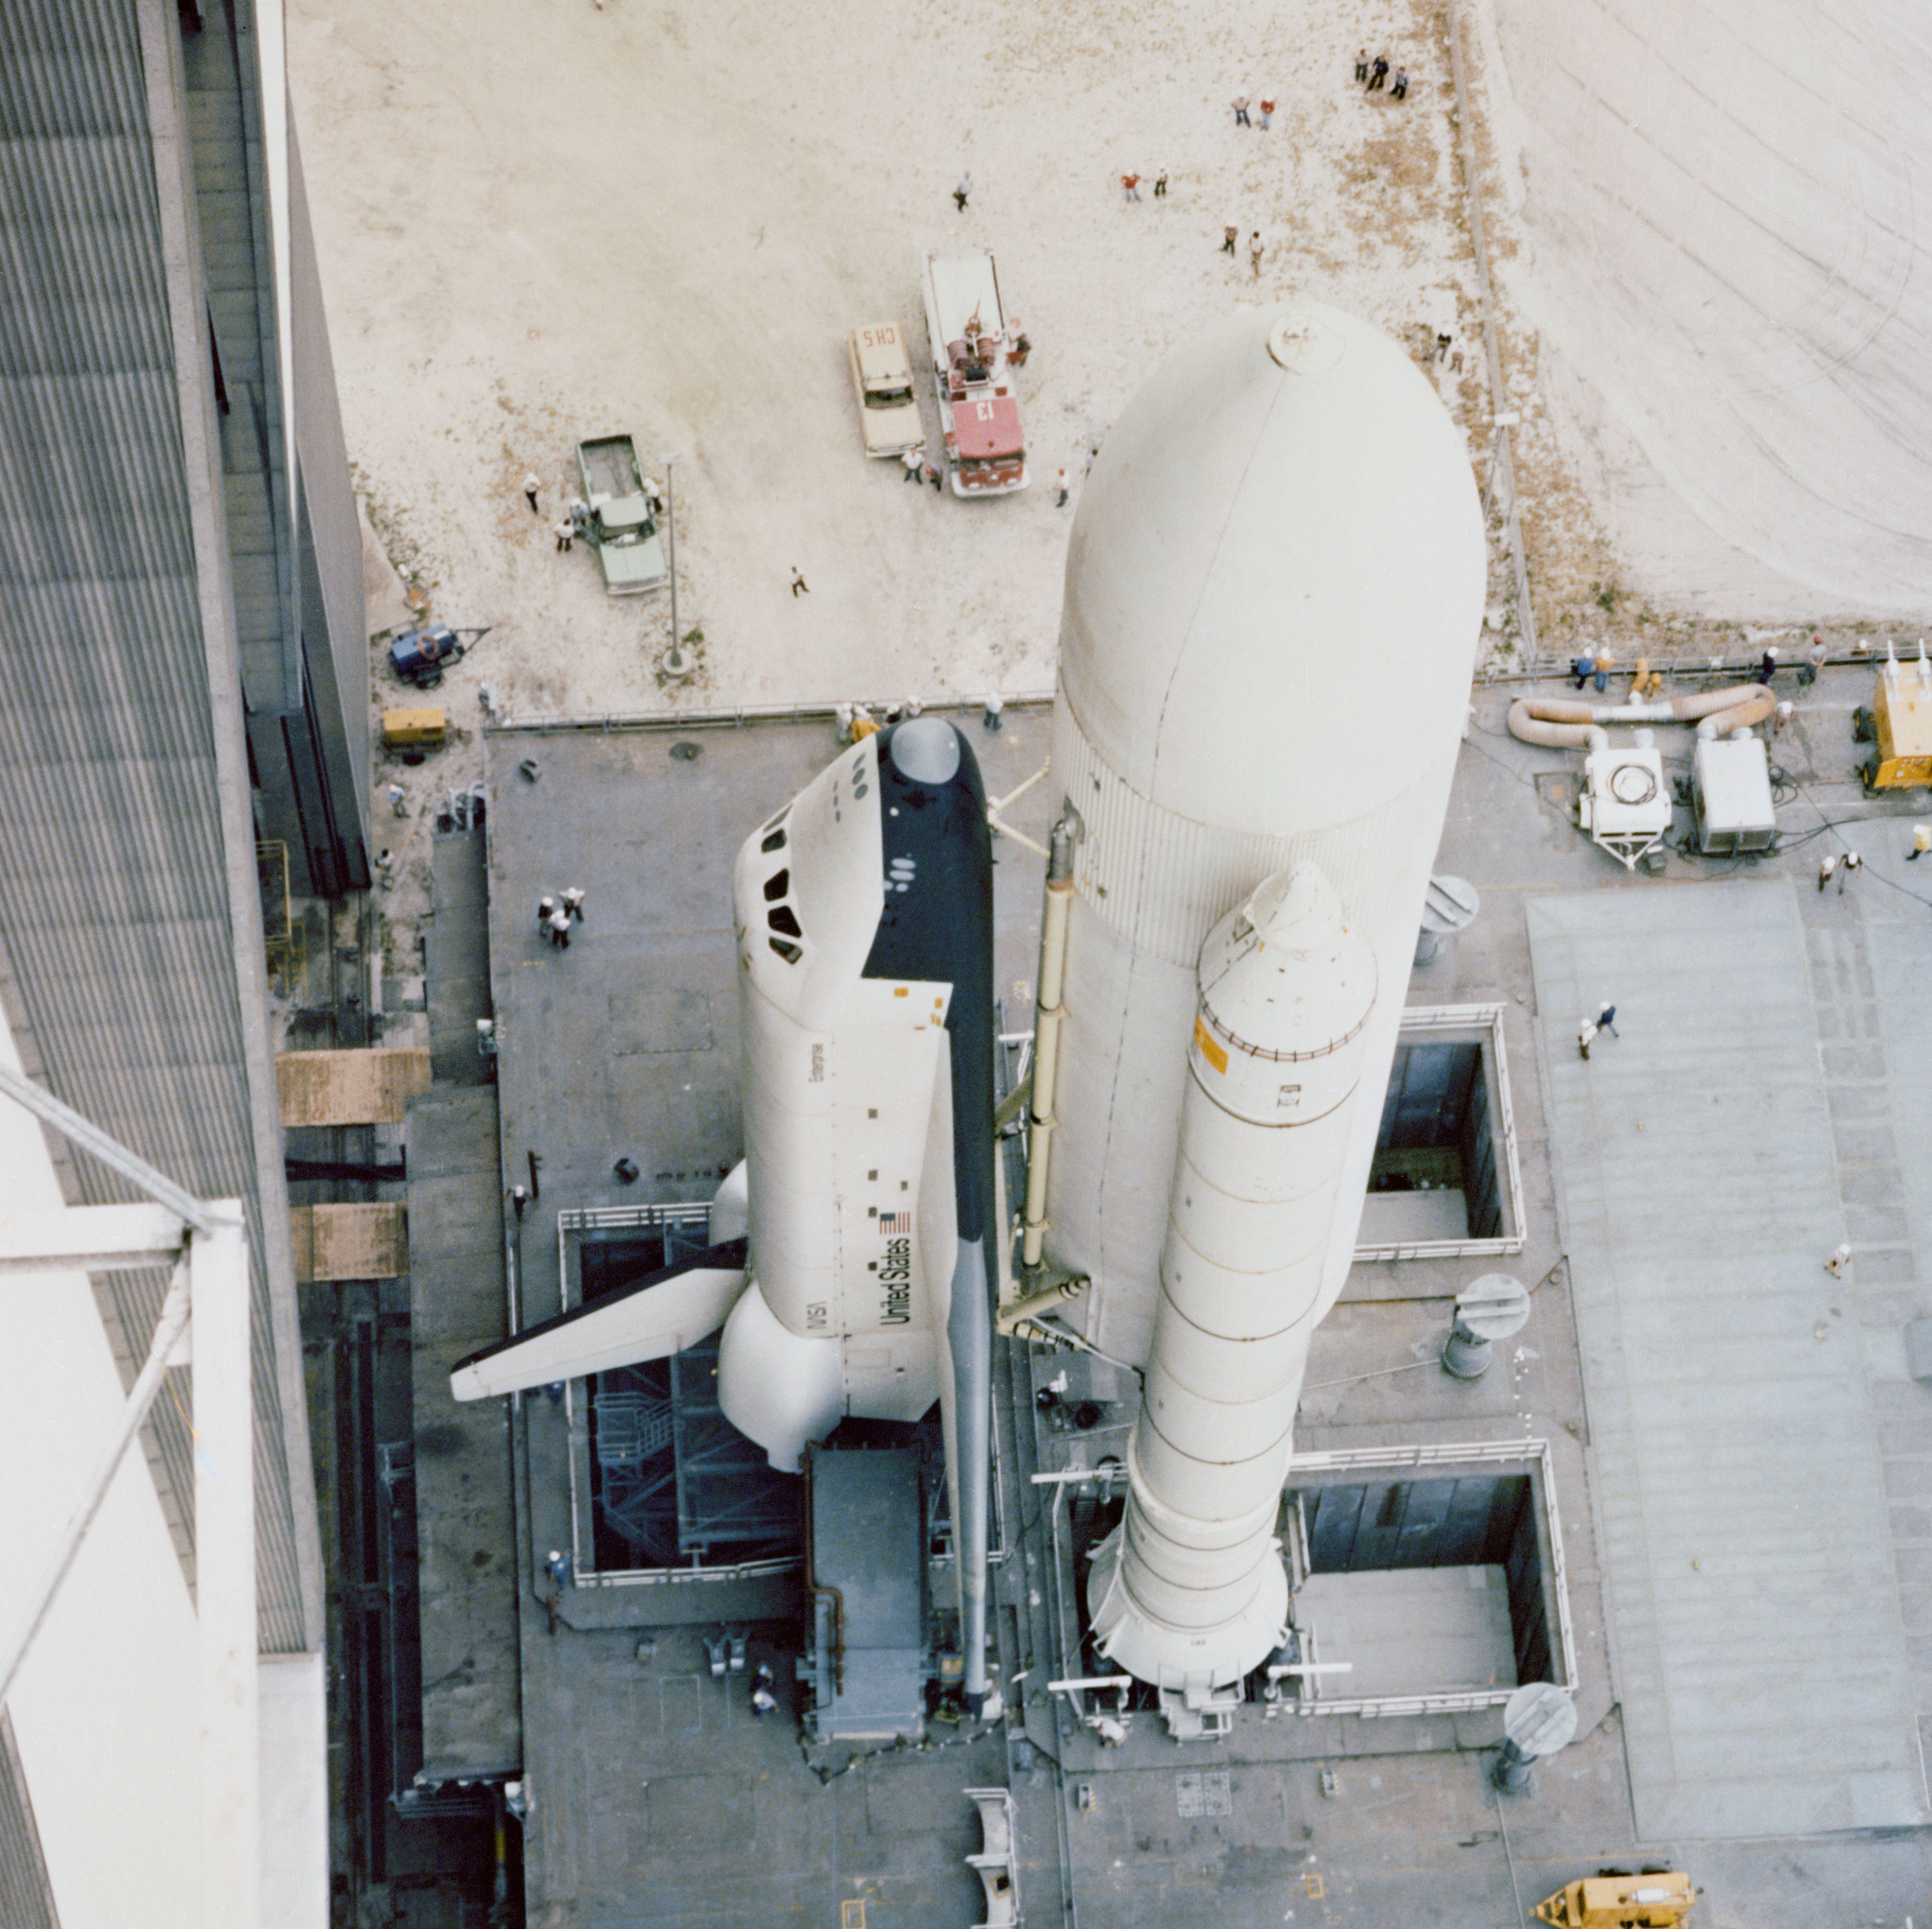 Enterprise exiting the Vehicle Assembly Building at NASA's Kennedy Space Center in Florida